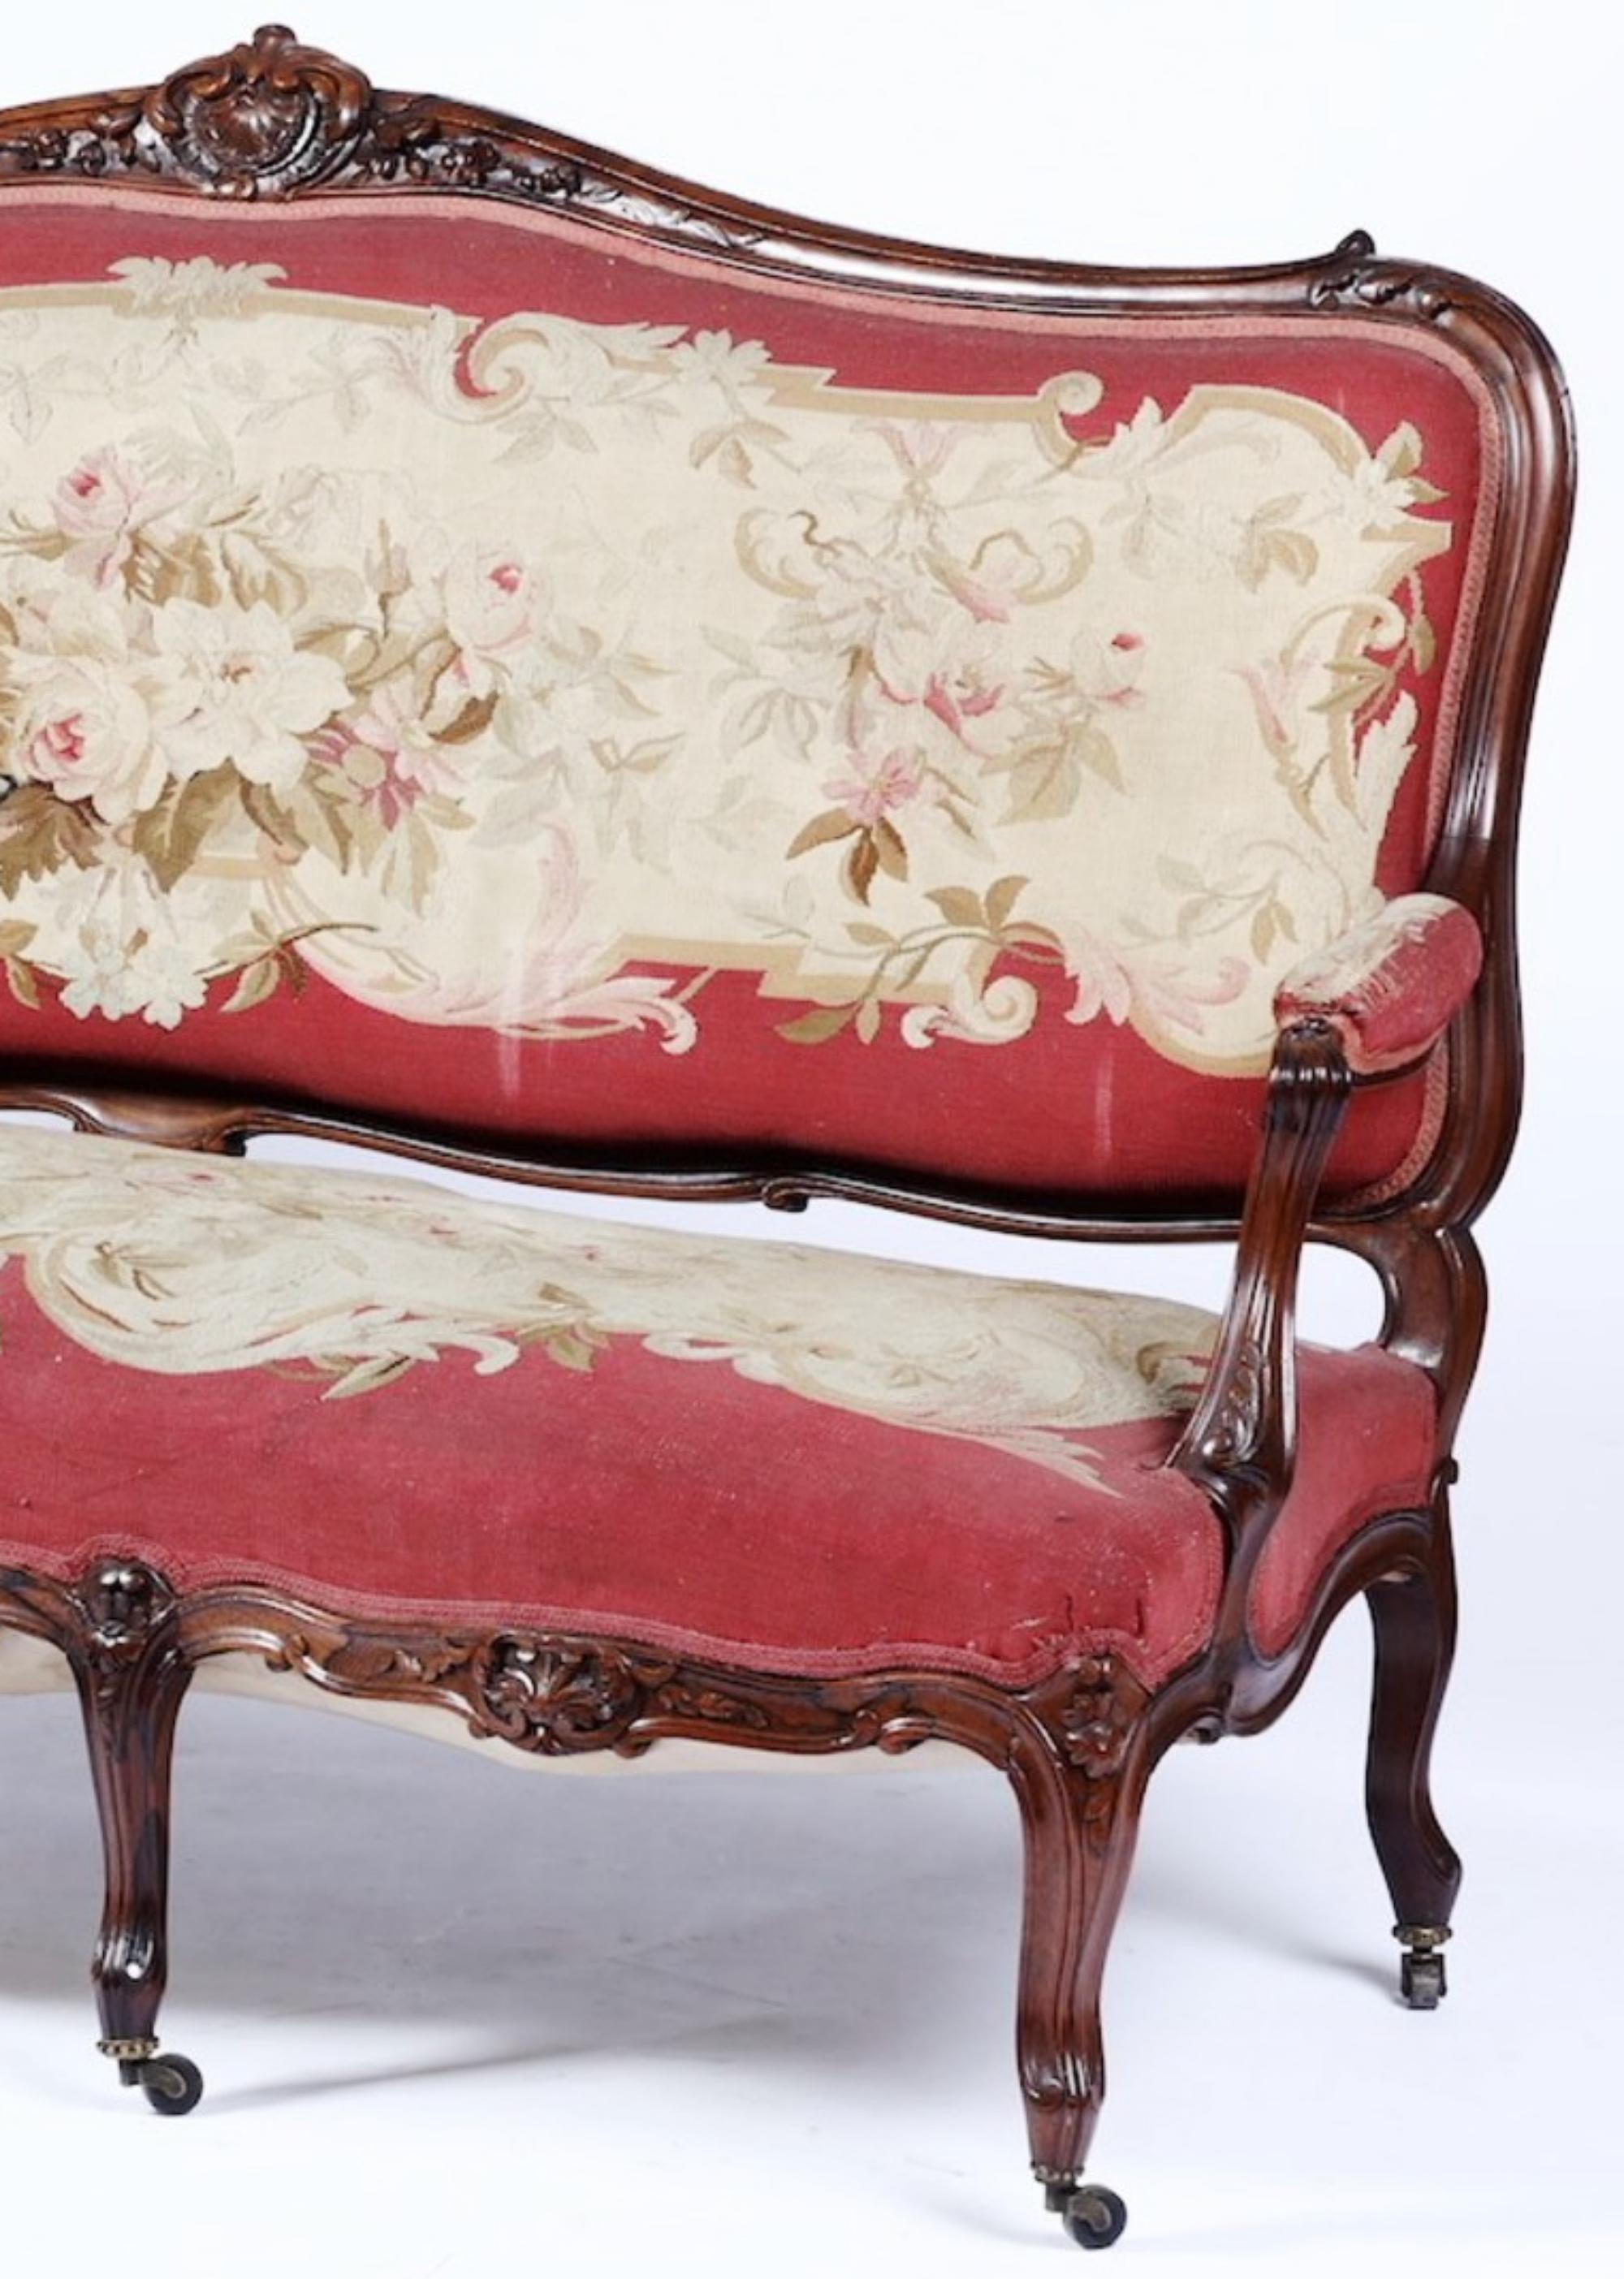 Canape Louis Philippe 19th century.
Width 188 - Prof. 75 - height 100 Cm
Rosewood carved with volutes and shell valves. Armrests and legs moved, feet fitted with wheels.
Seat and back upholstered and covered with Aubusson embroidered